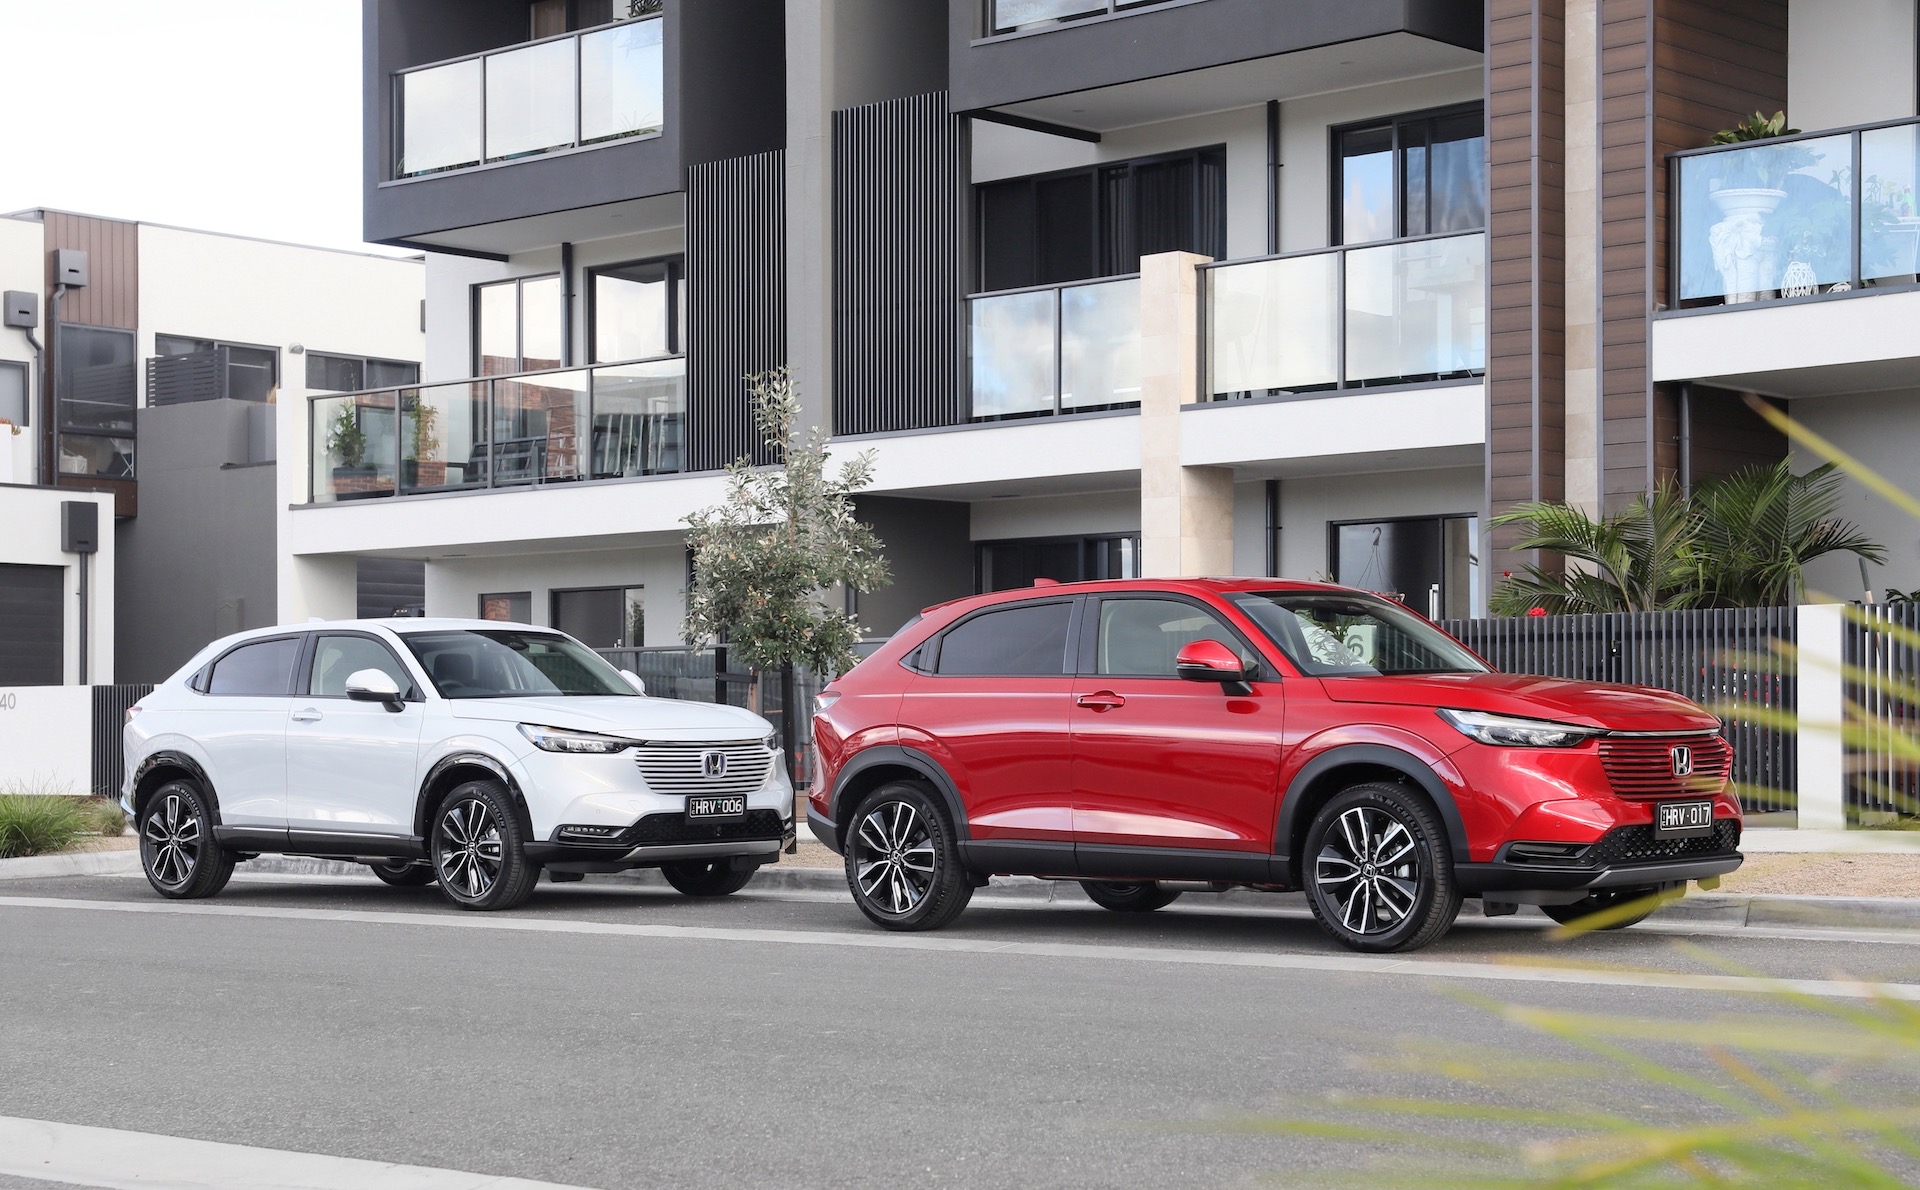 2022 Honda HR-V Australian pricing and features revealed